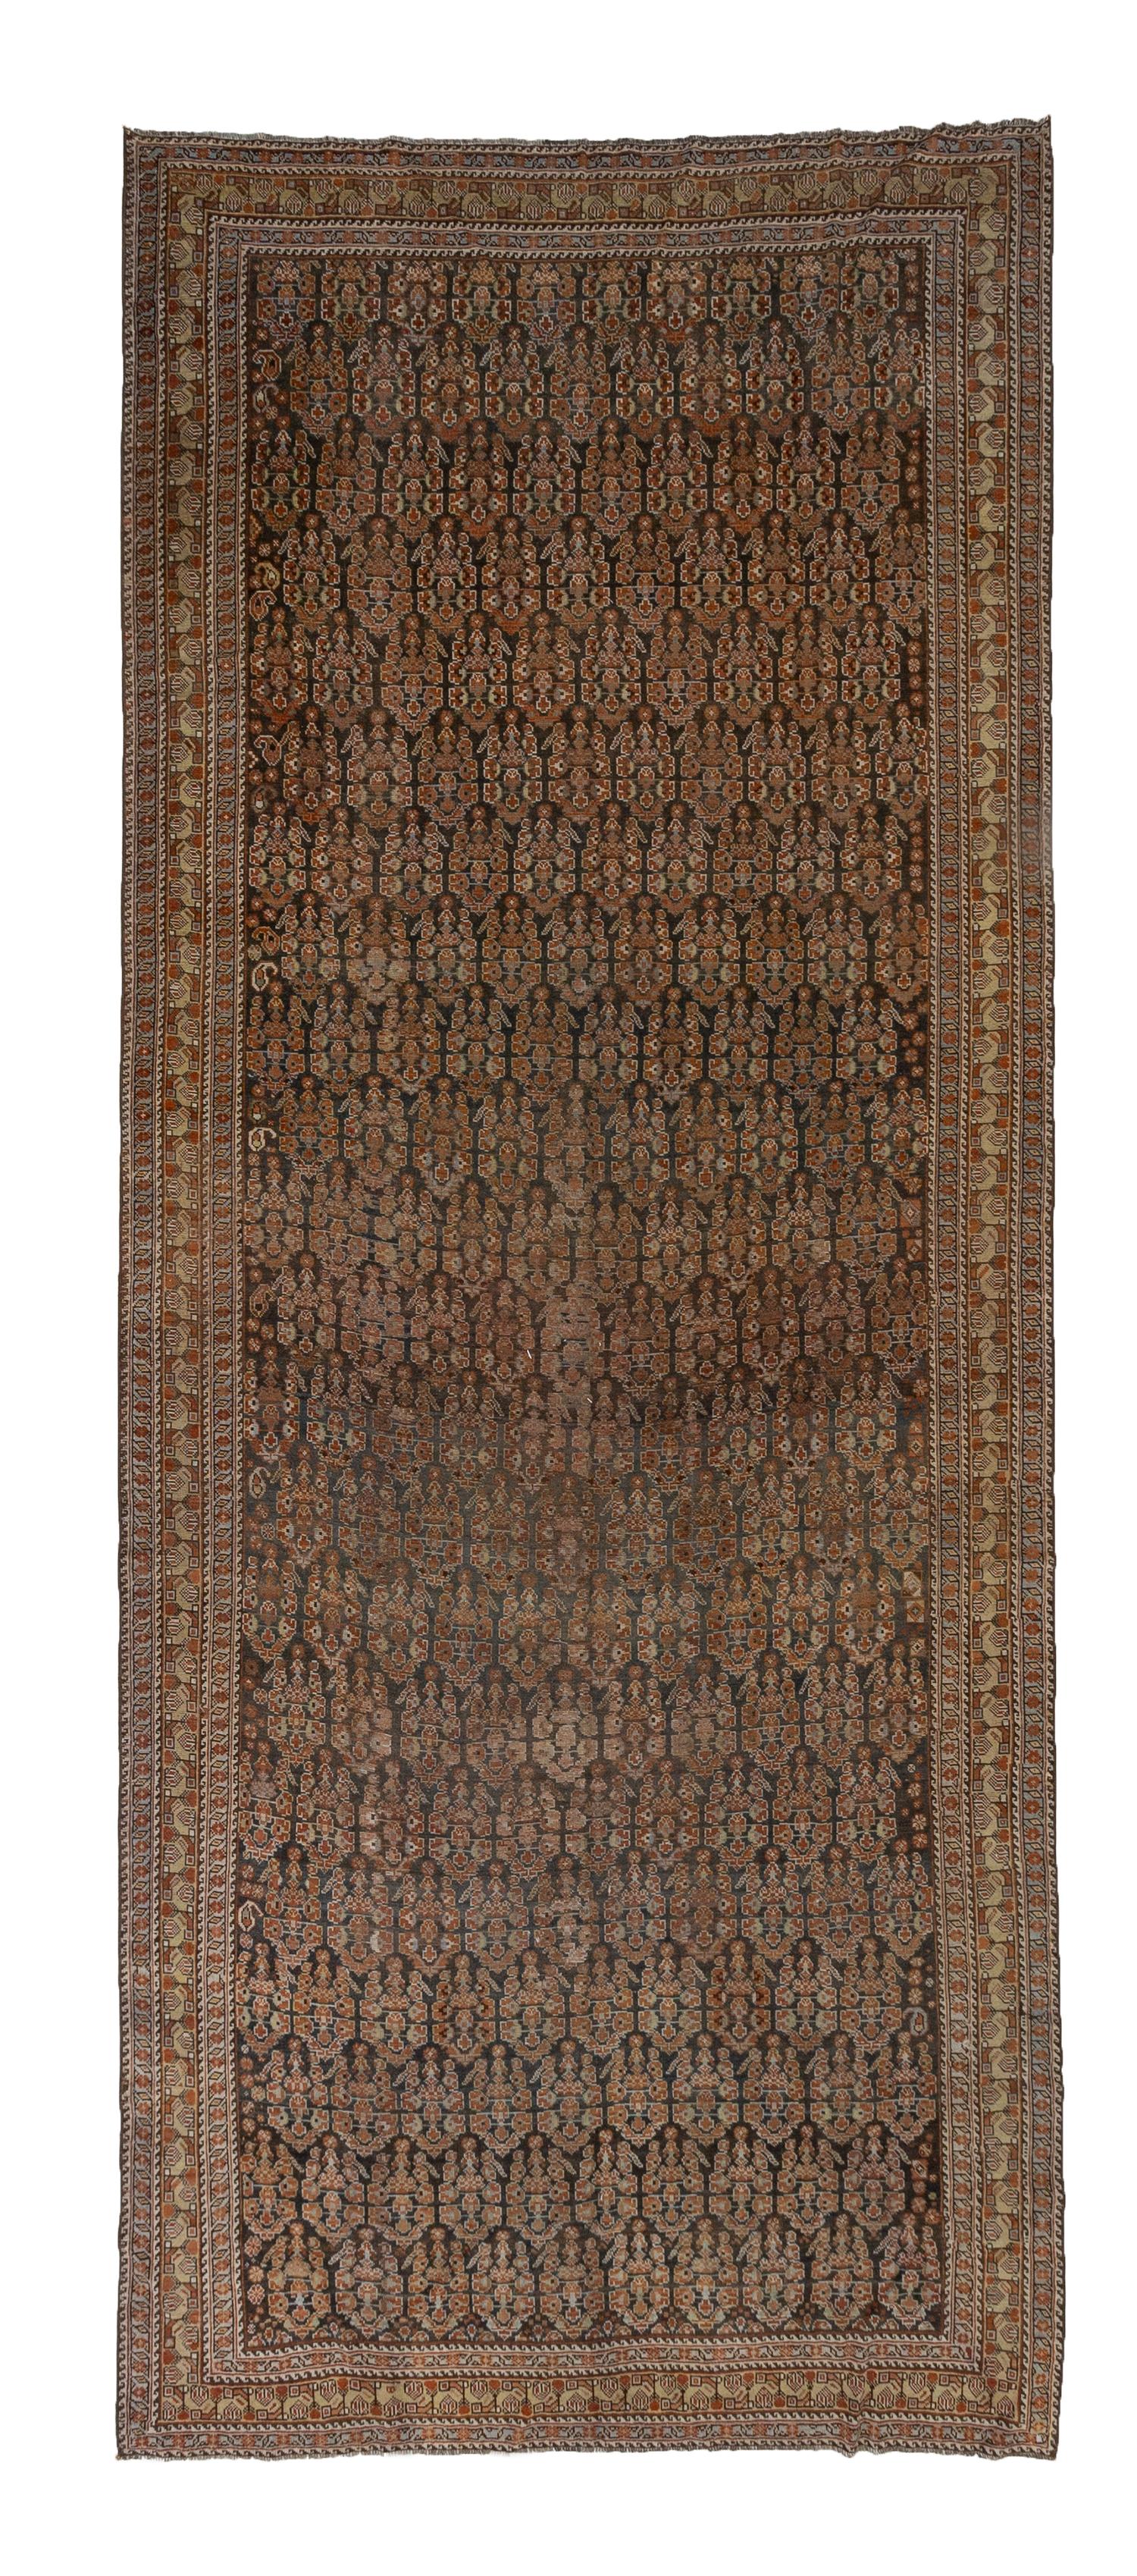 Age: Circa 1910

Colors: kohl black, umber, taupe, russet brown, oxblood

Pile: low, original

Wear Notes: 2

Material: Wool on wool. 

Gorgeous tribal antique Persian Shiraz rug woven in the early 1900's. Deep kohl black field filled with repeating